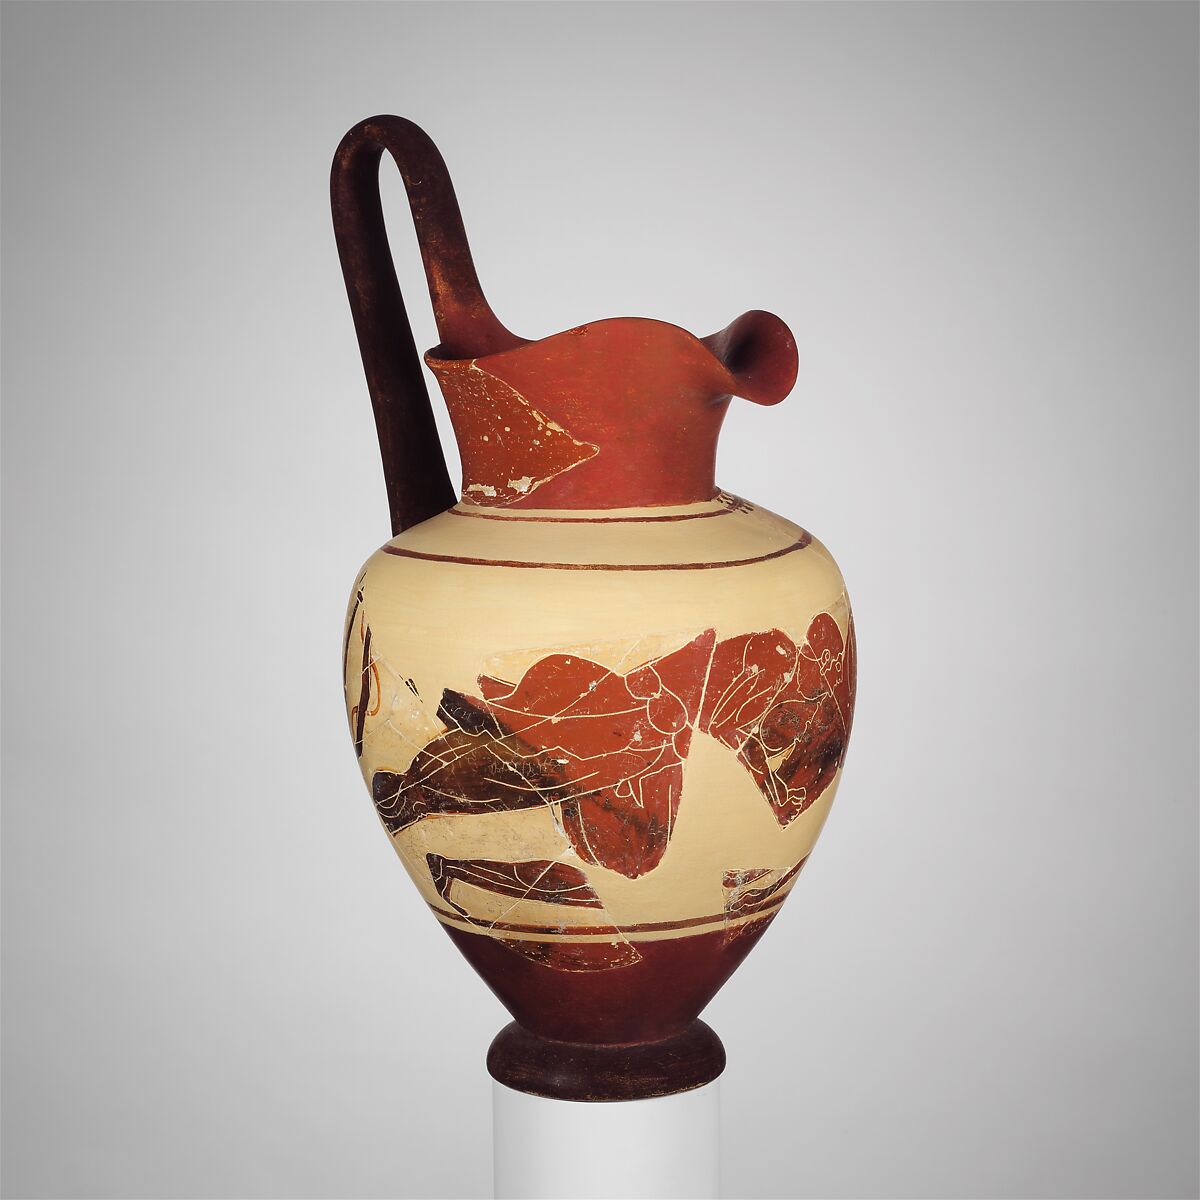 Terracotta oinochoe (jug), Attributed to the Painter of the Vienna Stamnos 318, Terracotta, Etruscan 